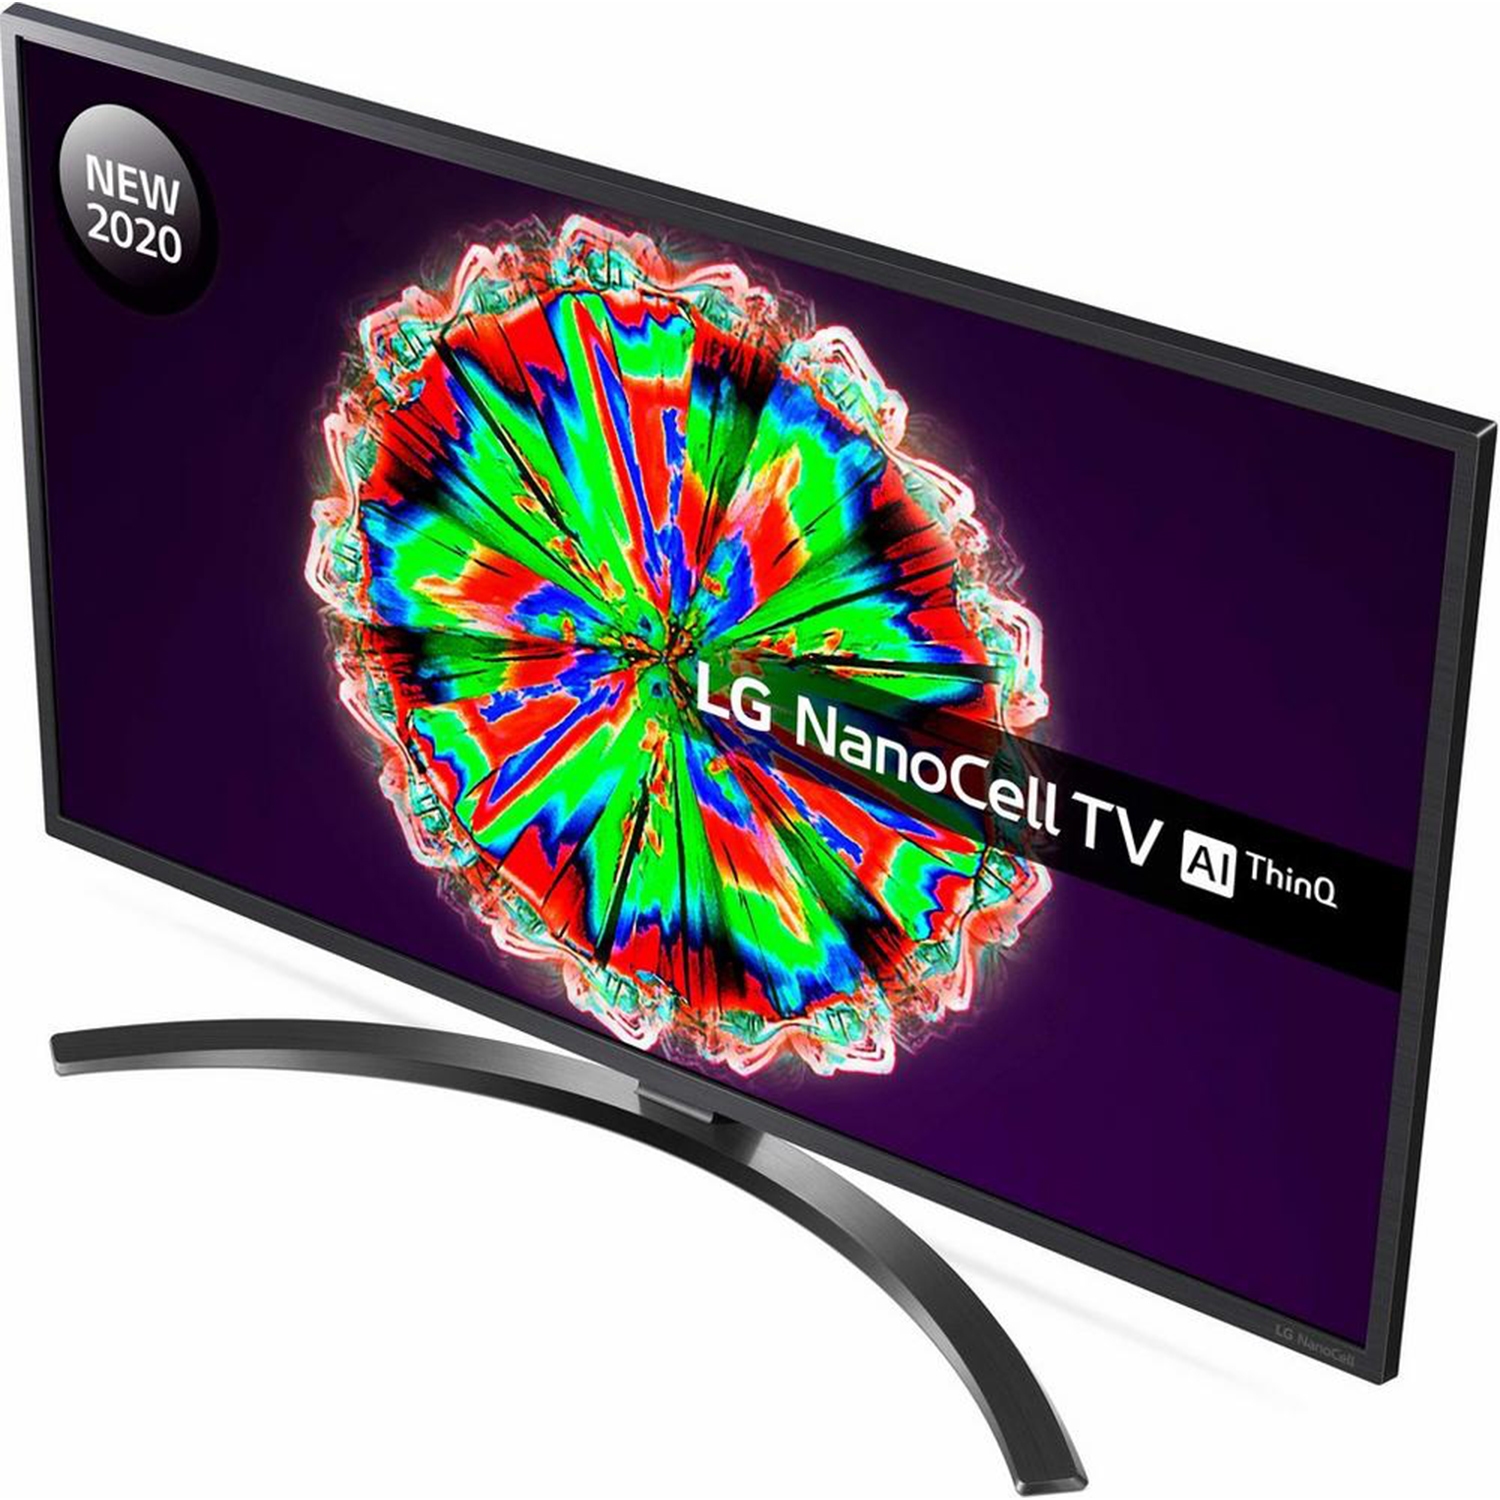 LG 65" 4K Ultra HD HDR10 NanoCell Smart TV with AI Sound & Voice Assistants - 9